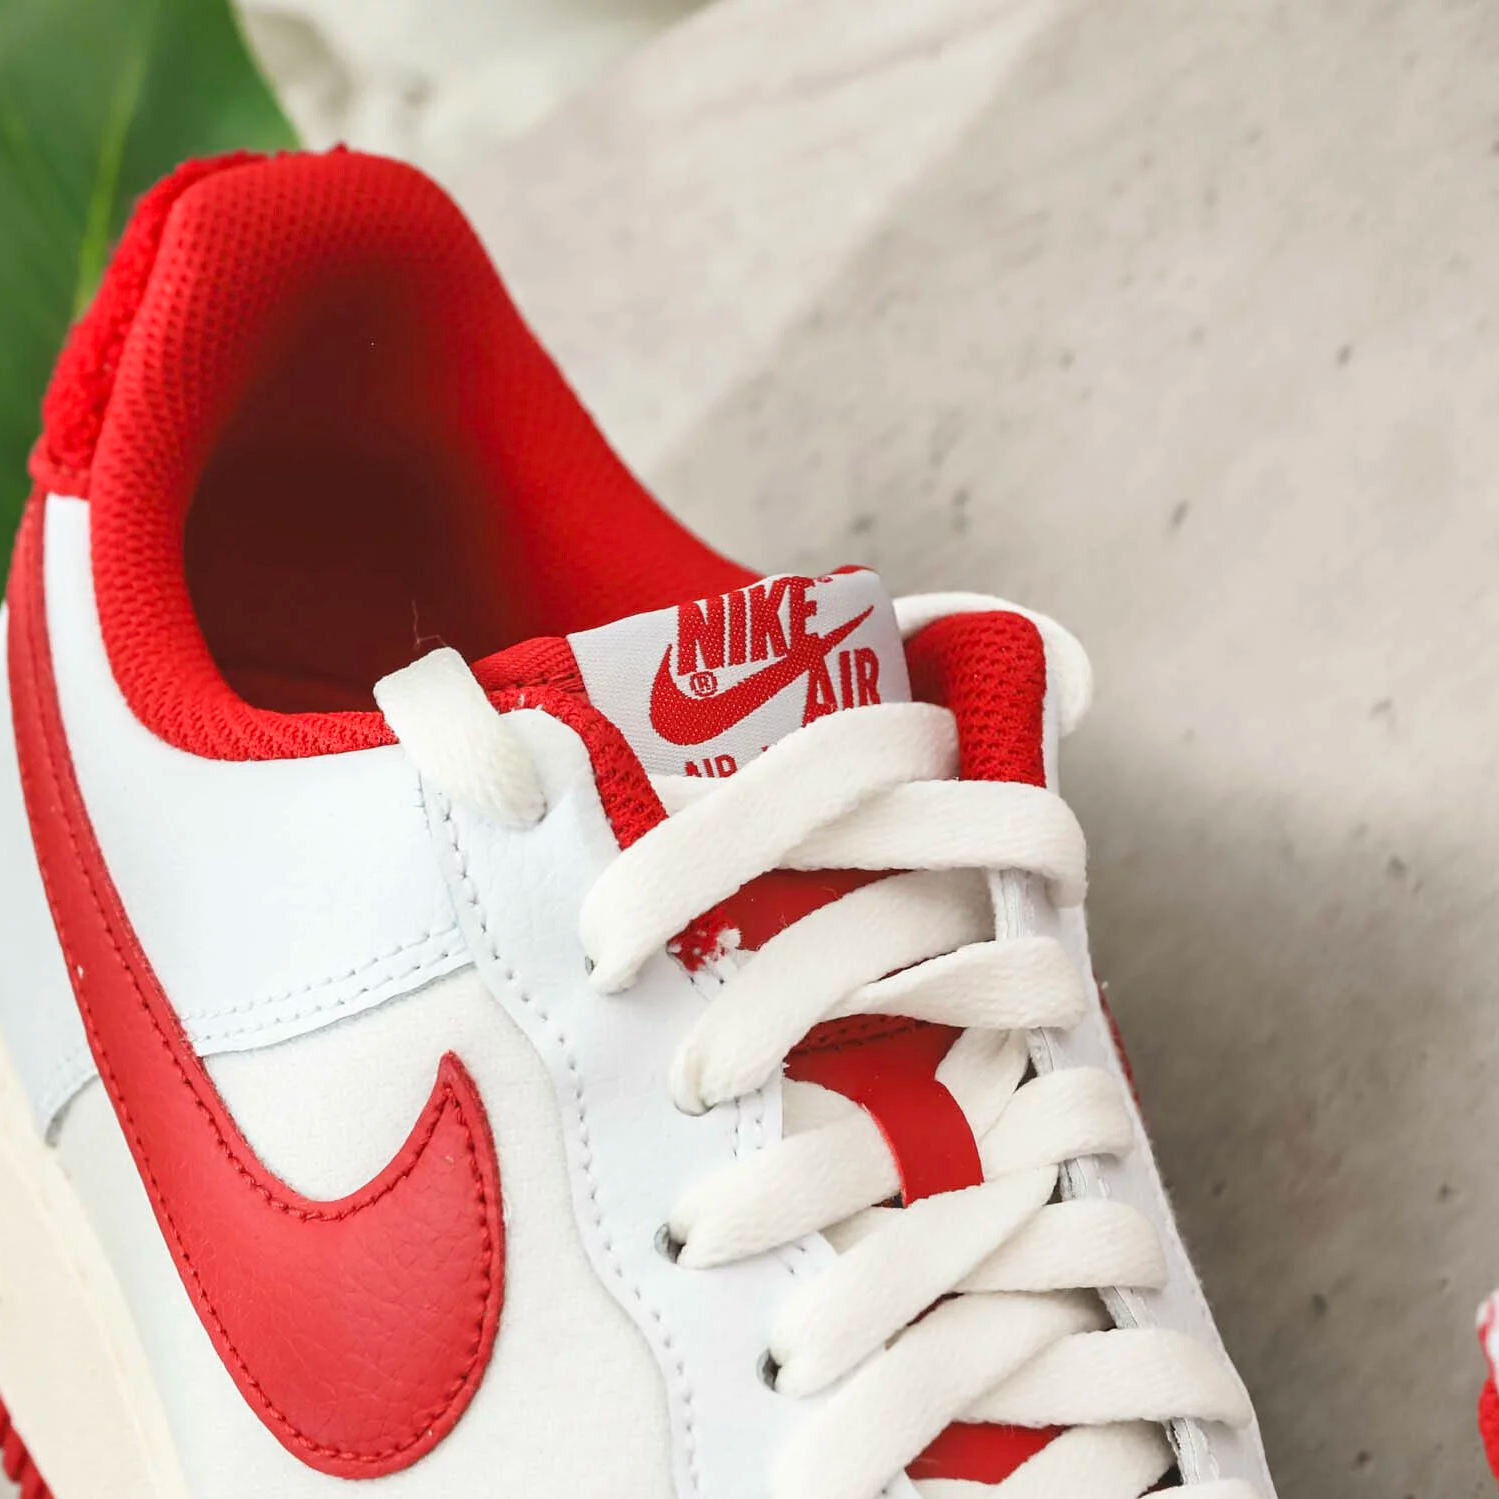 Nike Air Force 1 React Coconut Milk [DH7615-100] – hyped.